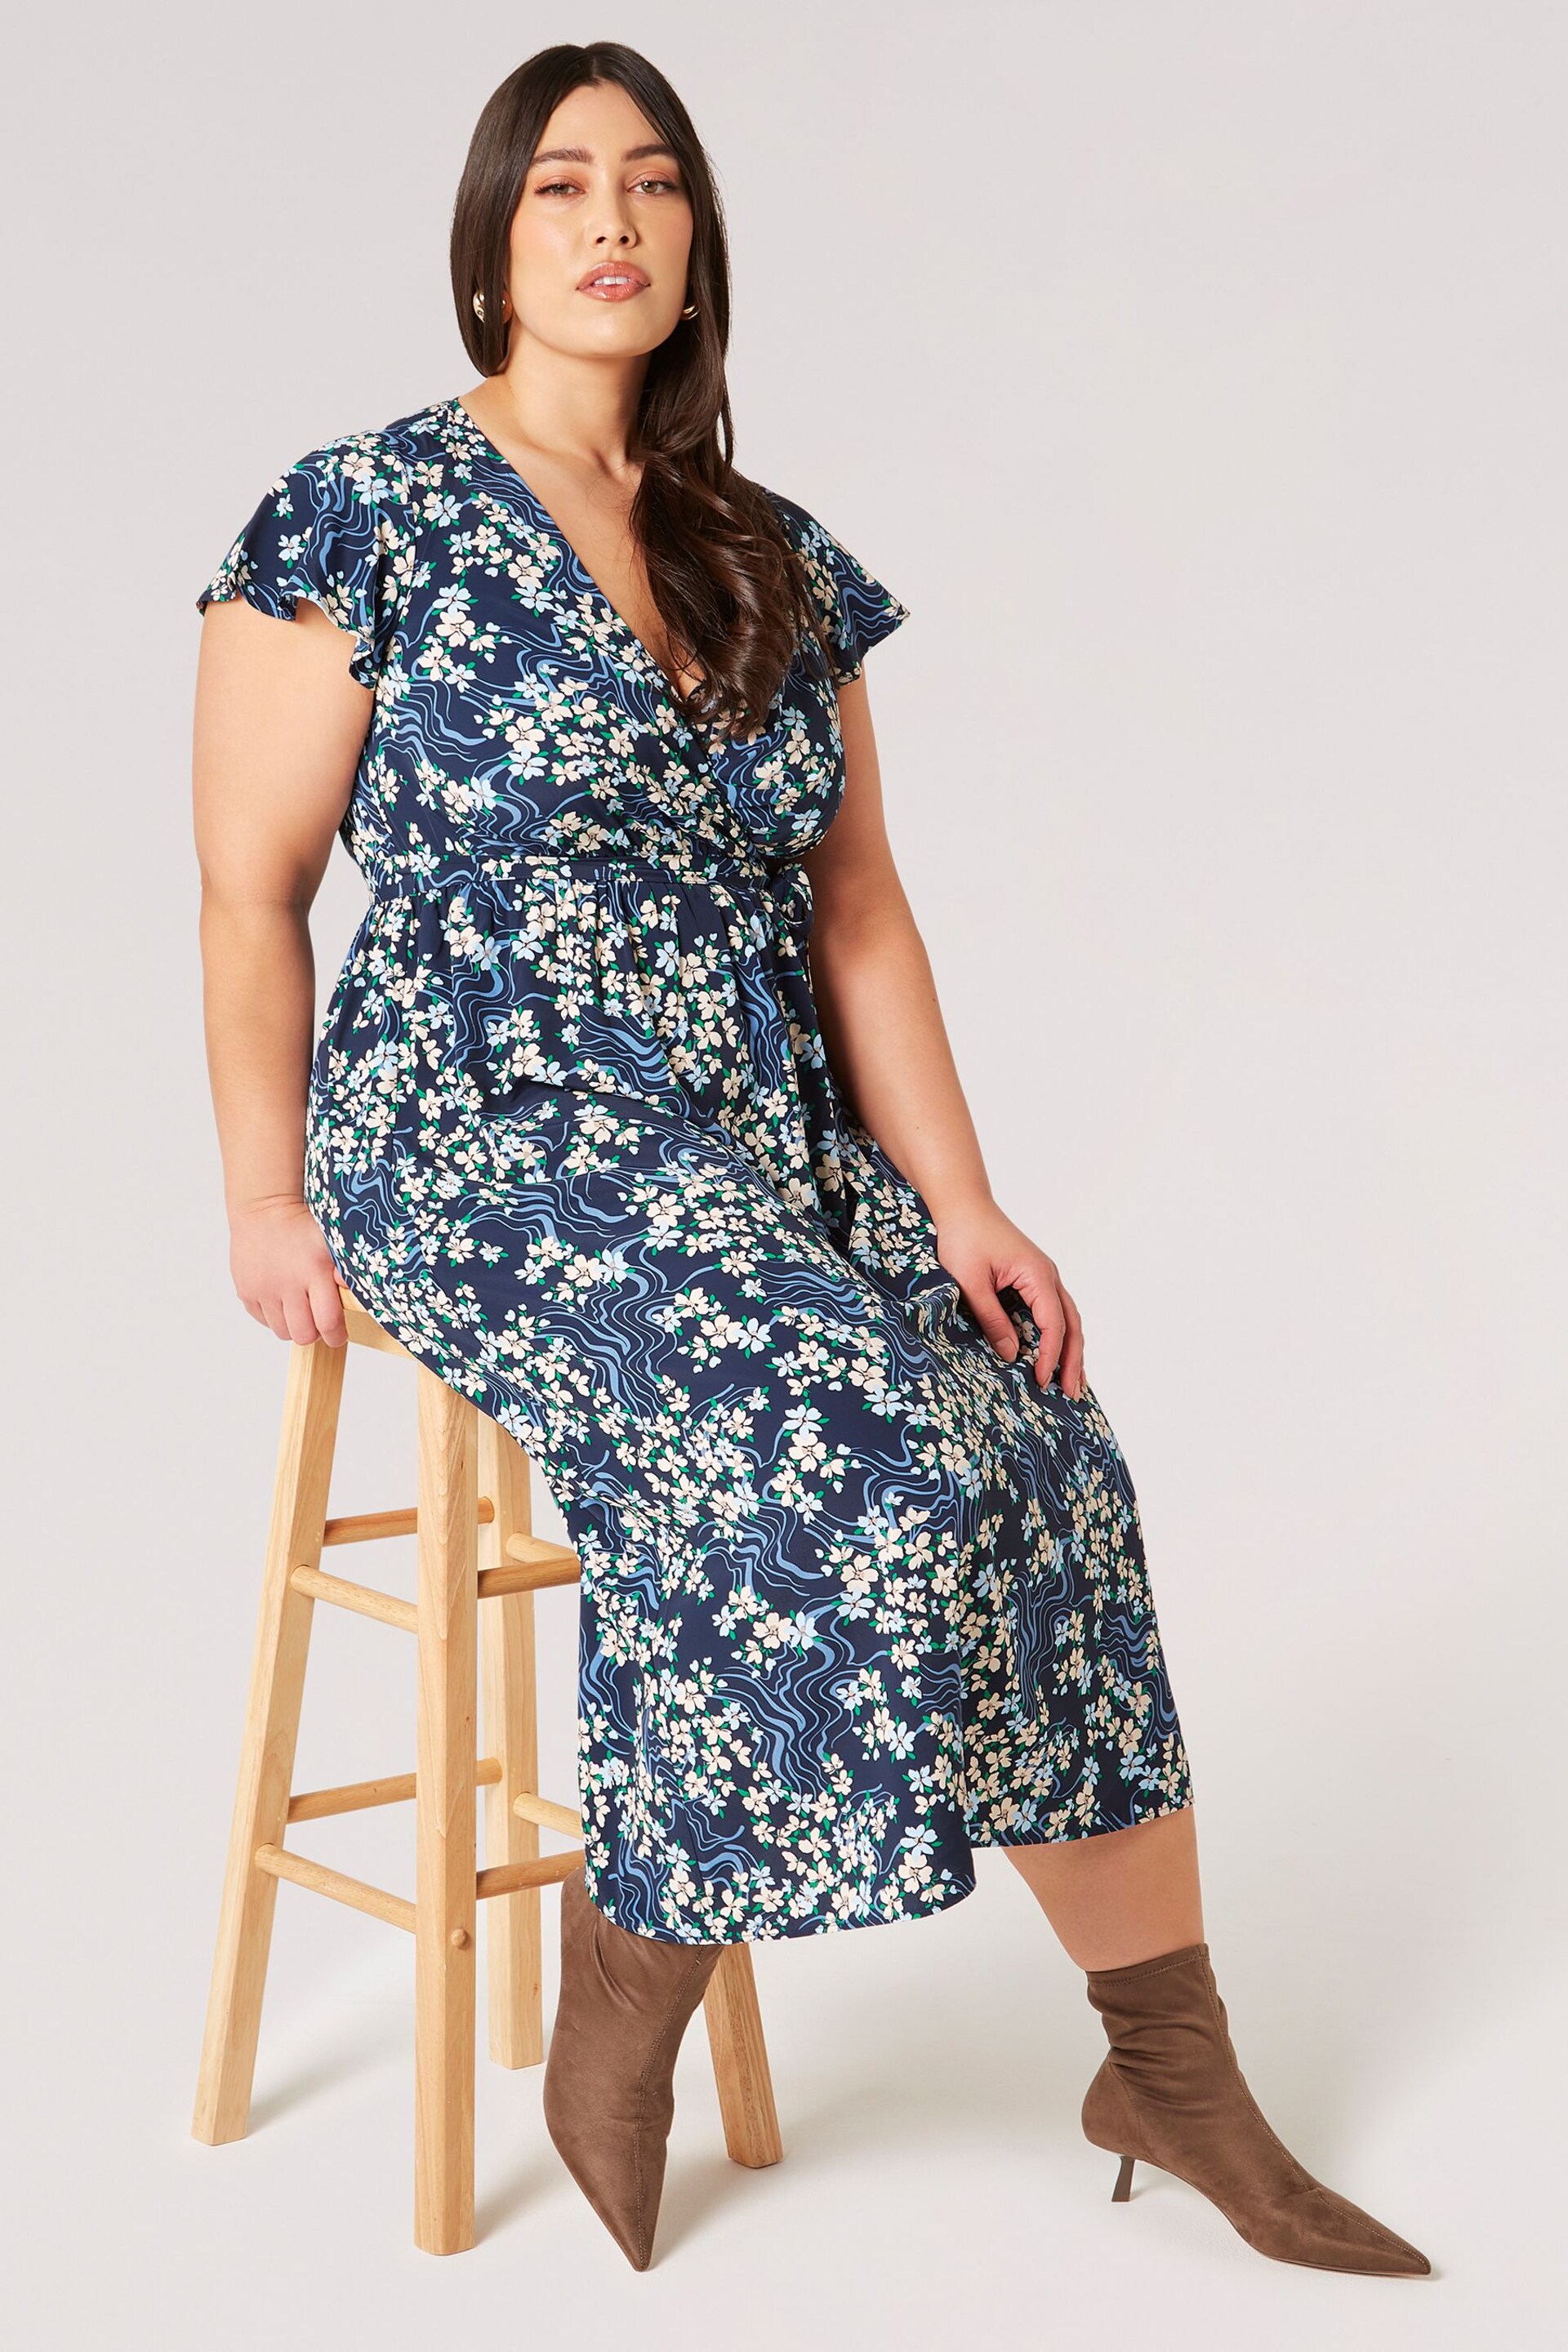 Apricot Blue Floral Swirl Angel Sleeve Wrap Dress - Image 1 of 4